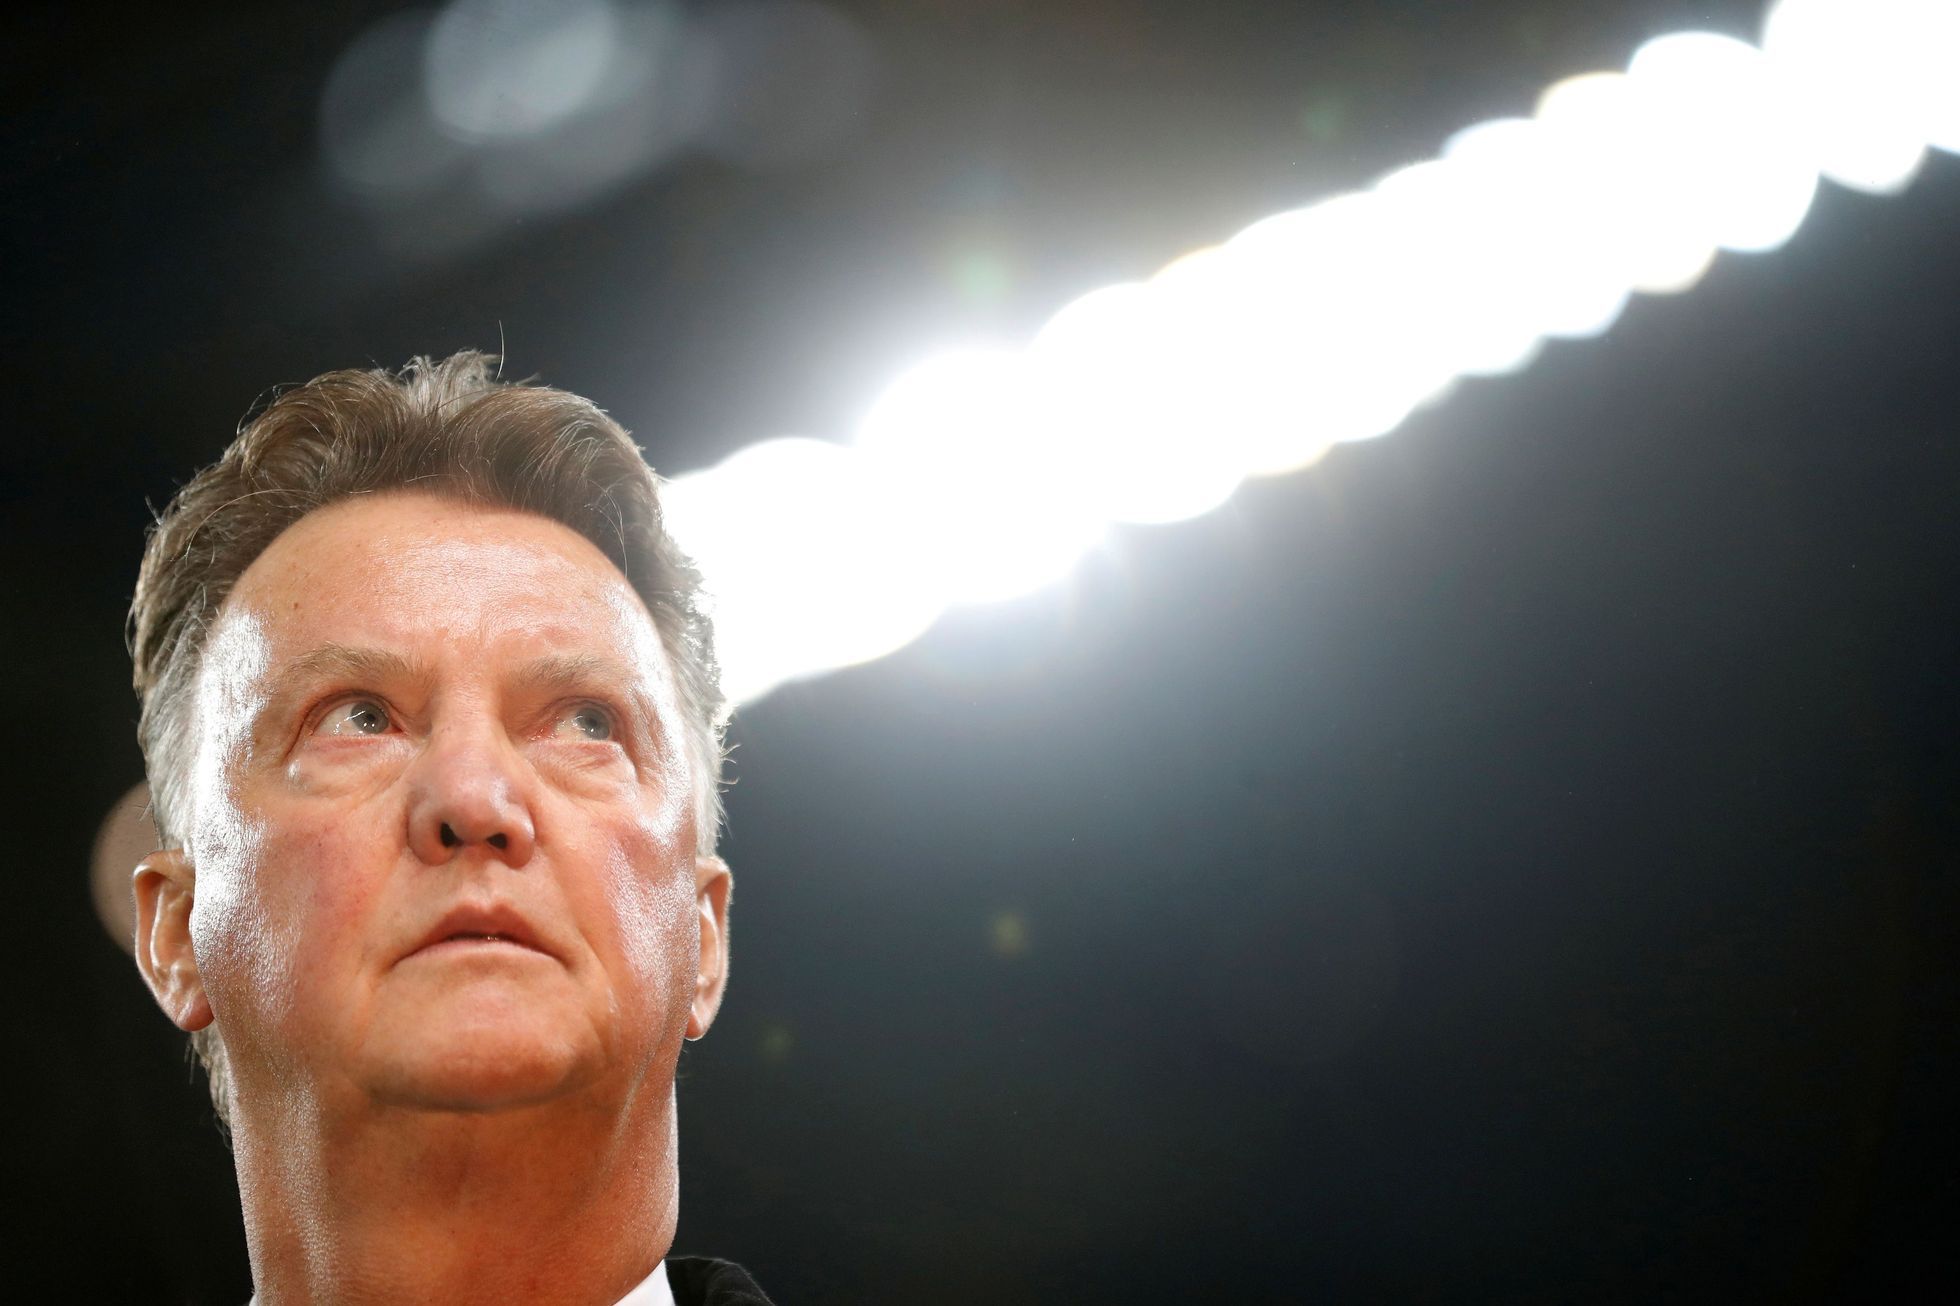 “I’m being treated for cancer,” said the famous Dutch coach Van Gaal.  He wants to train at the World Cup